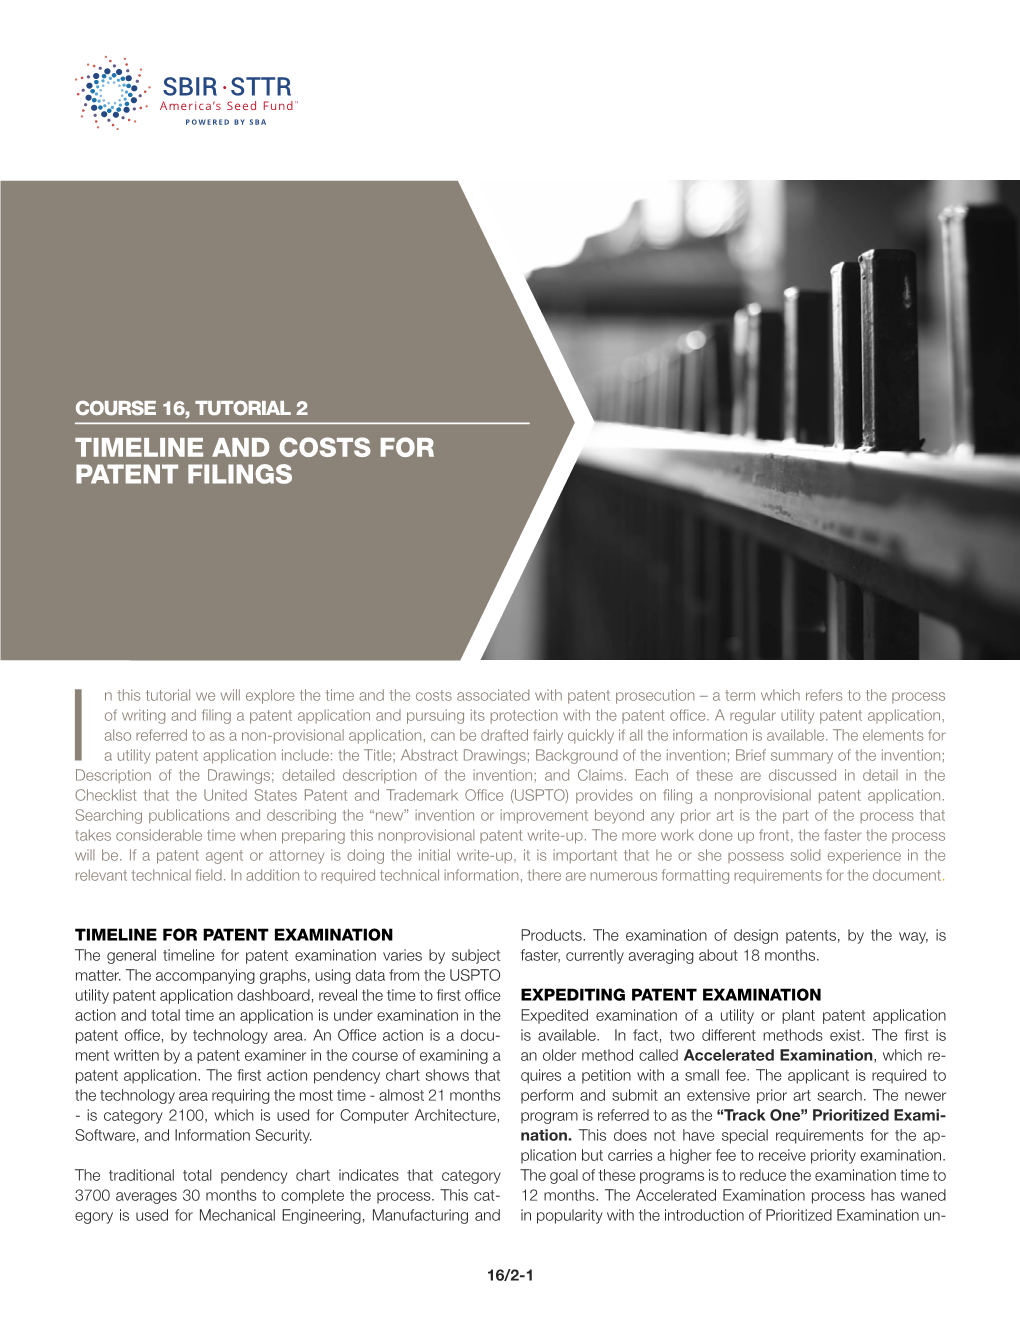 Timeline and Costs for Patent Filings